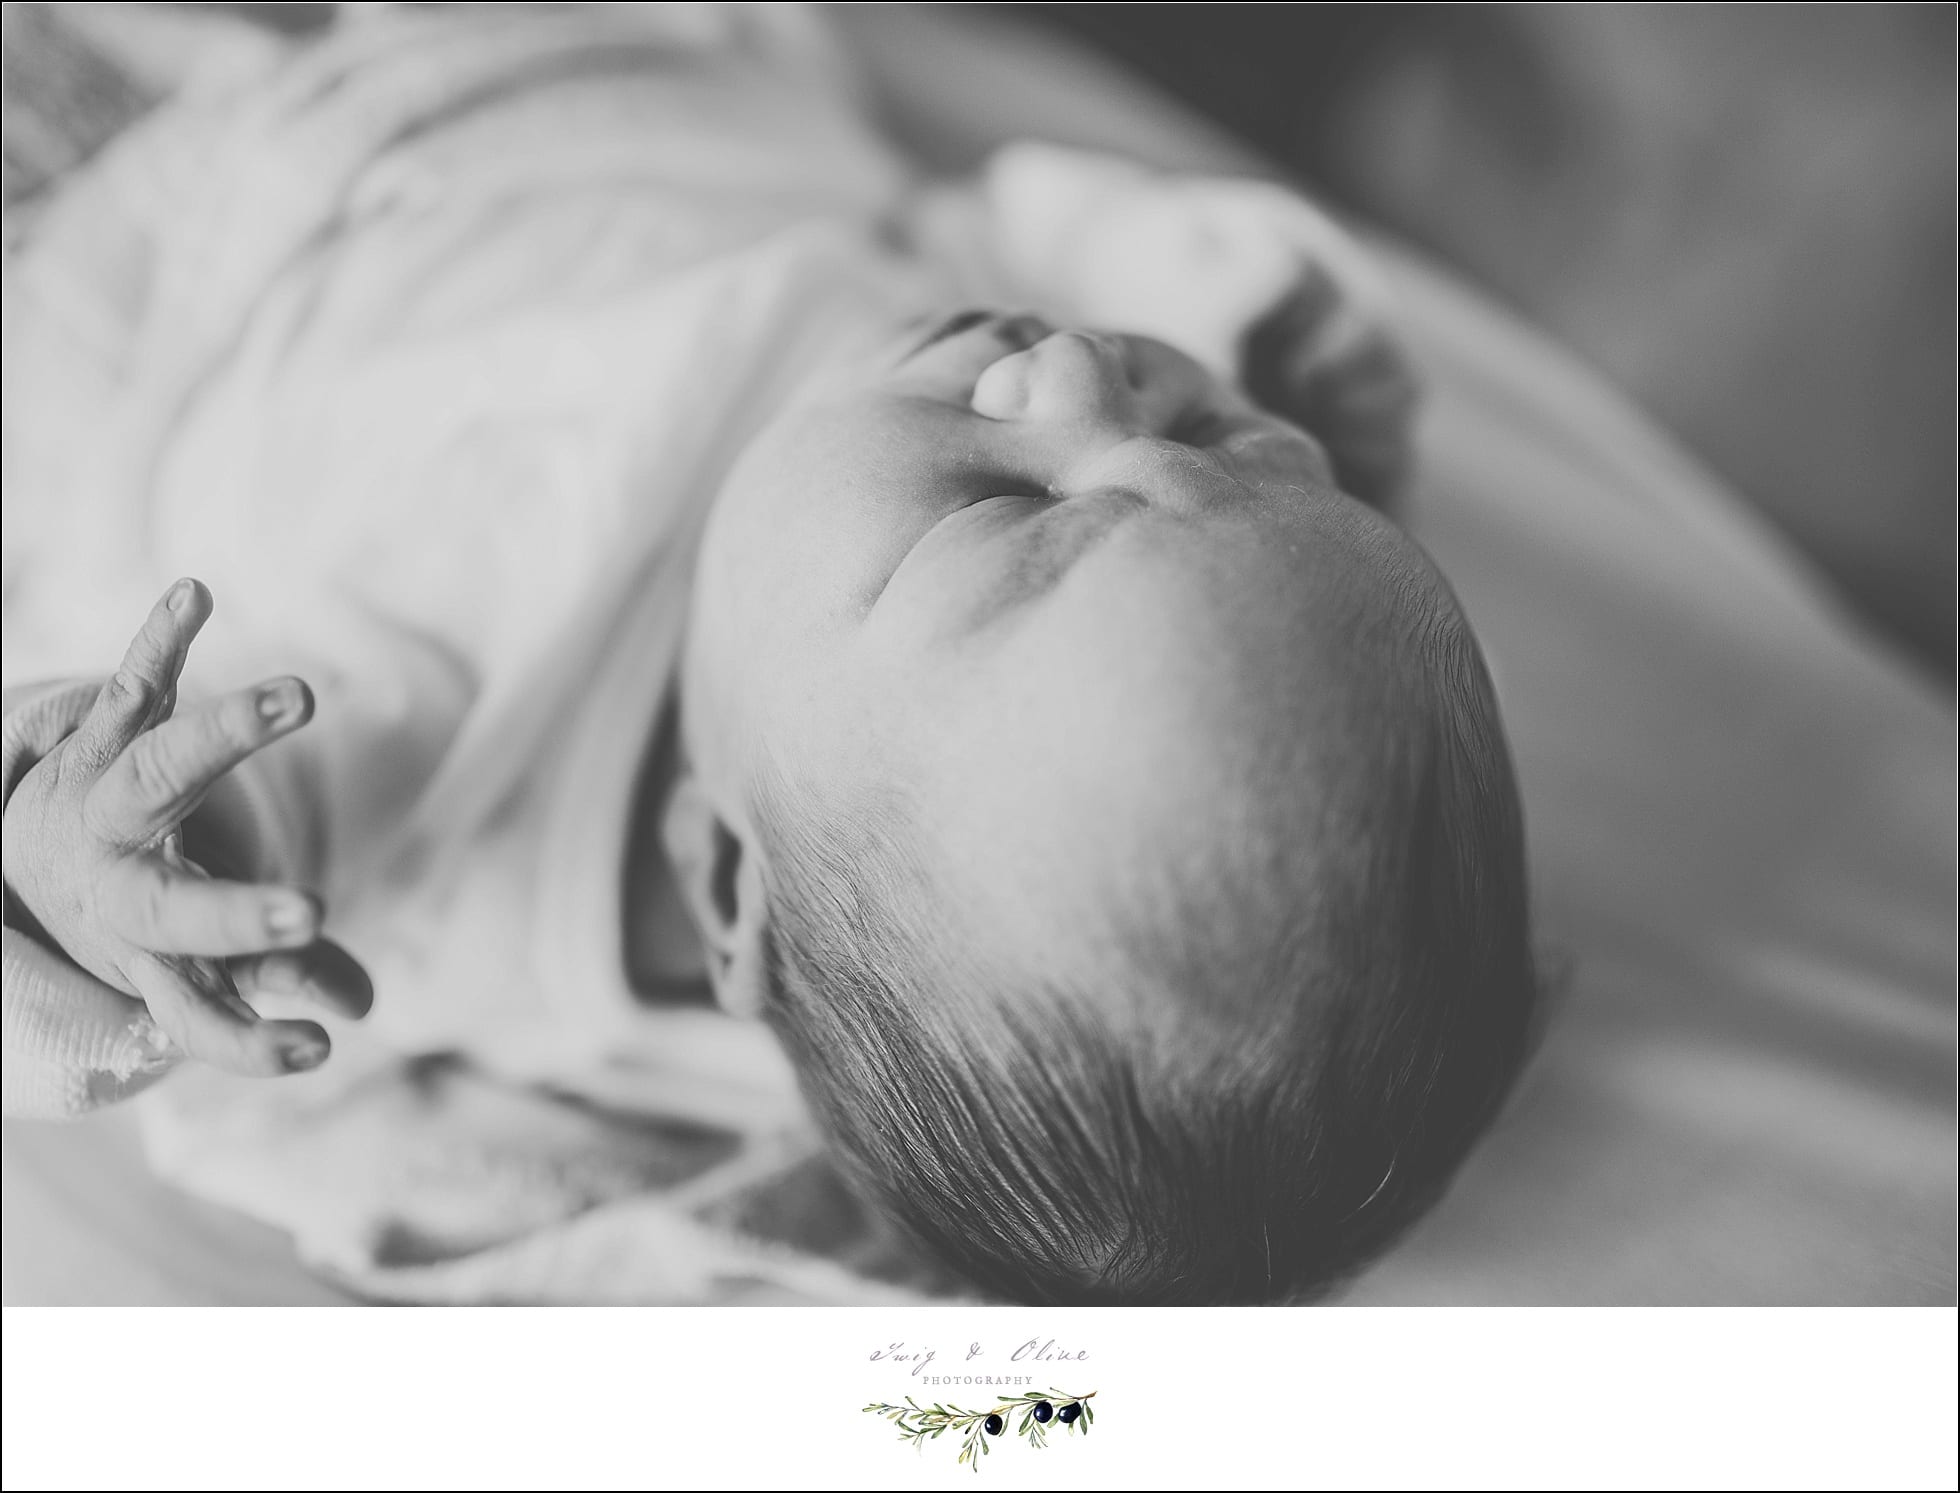 black and white photography, newborns, born yesterday, hospital photography, swaddled, miracles, precious, newly newborns, Twig and Olive photography hospital newborns, wicked awesome, TOP